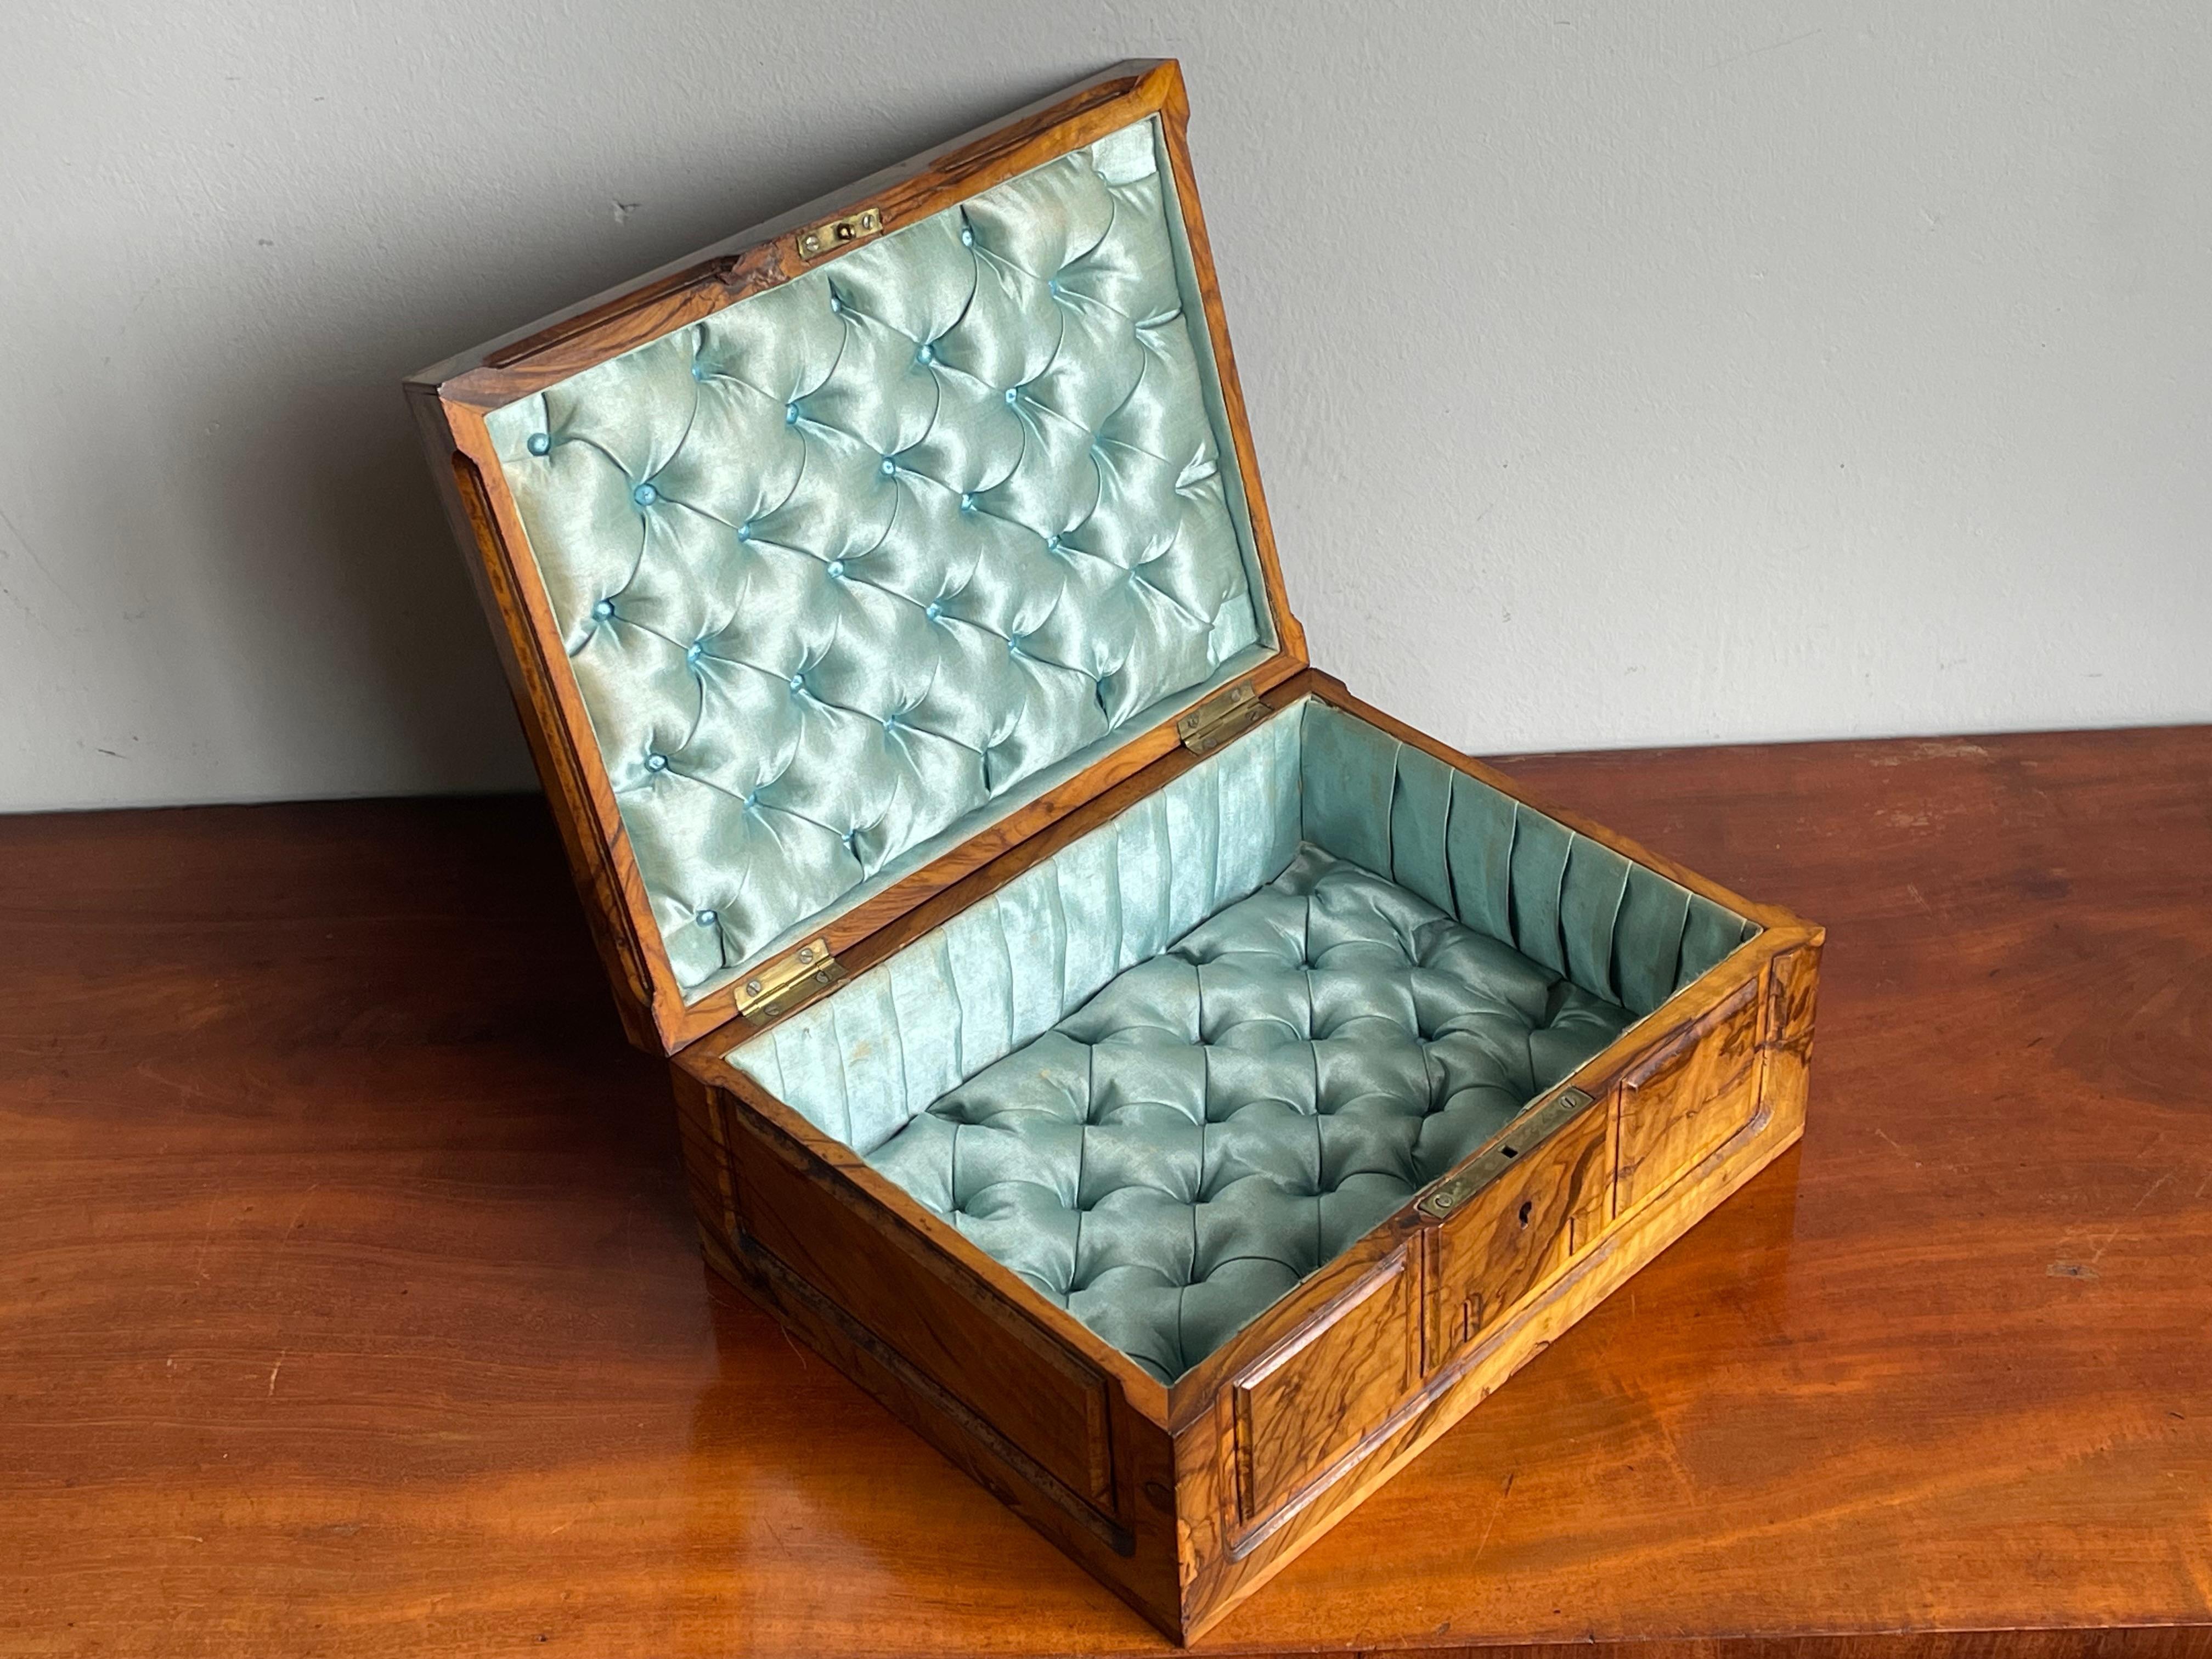 Top quality and excellent condition antique box for the collectors of rare and beautiful.

Over the years we have had the pleasure of owning and selling some truly beautiful antique boxes and this handcrafted jewelry box is right up there with the